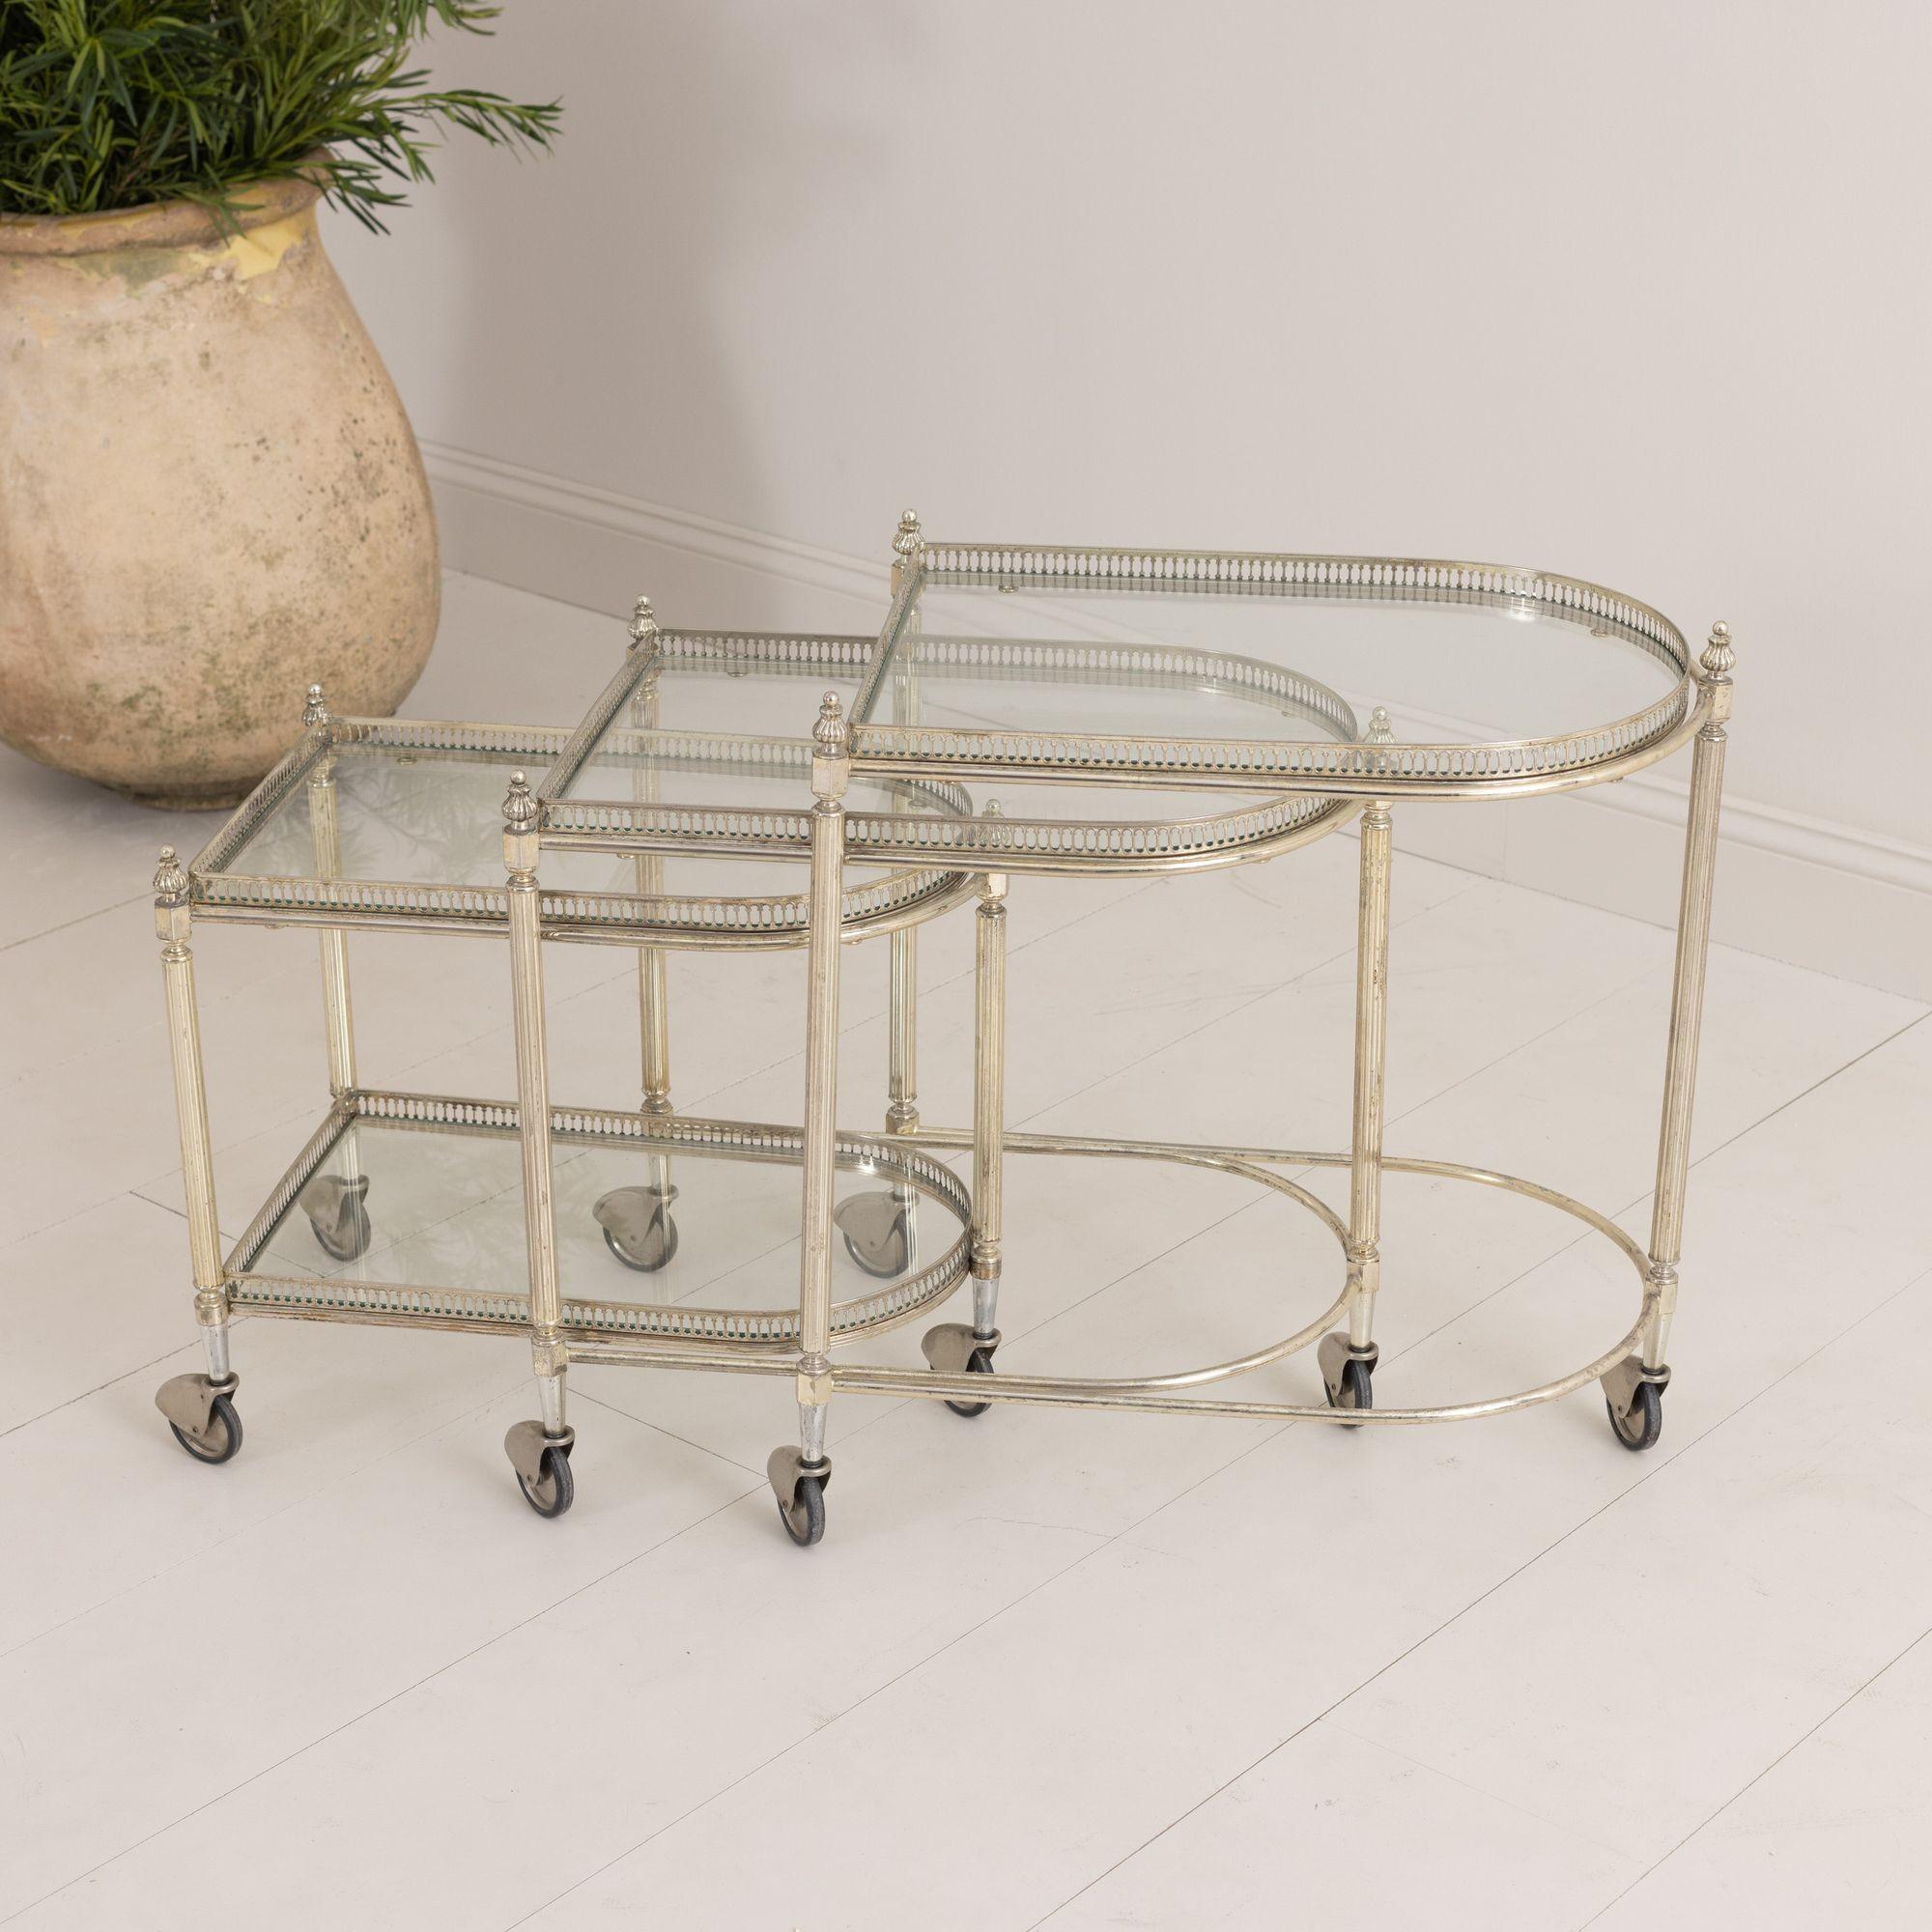 A vintage French nickel serving trolley trio with original castor wheels found in Paris, circa 1940.  Three separate trolley tables with nice elongated shape nest together beautifully. Two-tiered glass with nicely patinated, pierced gallery to the